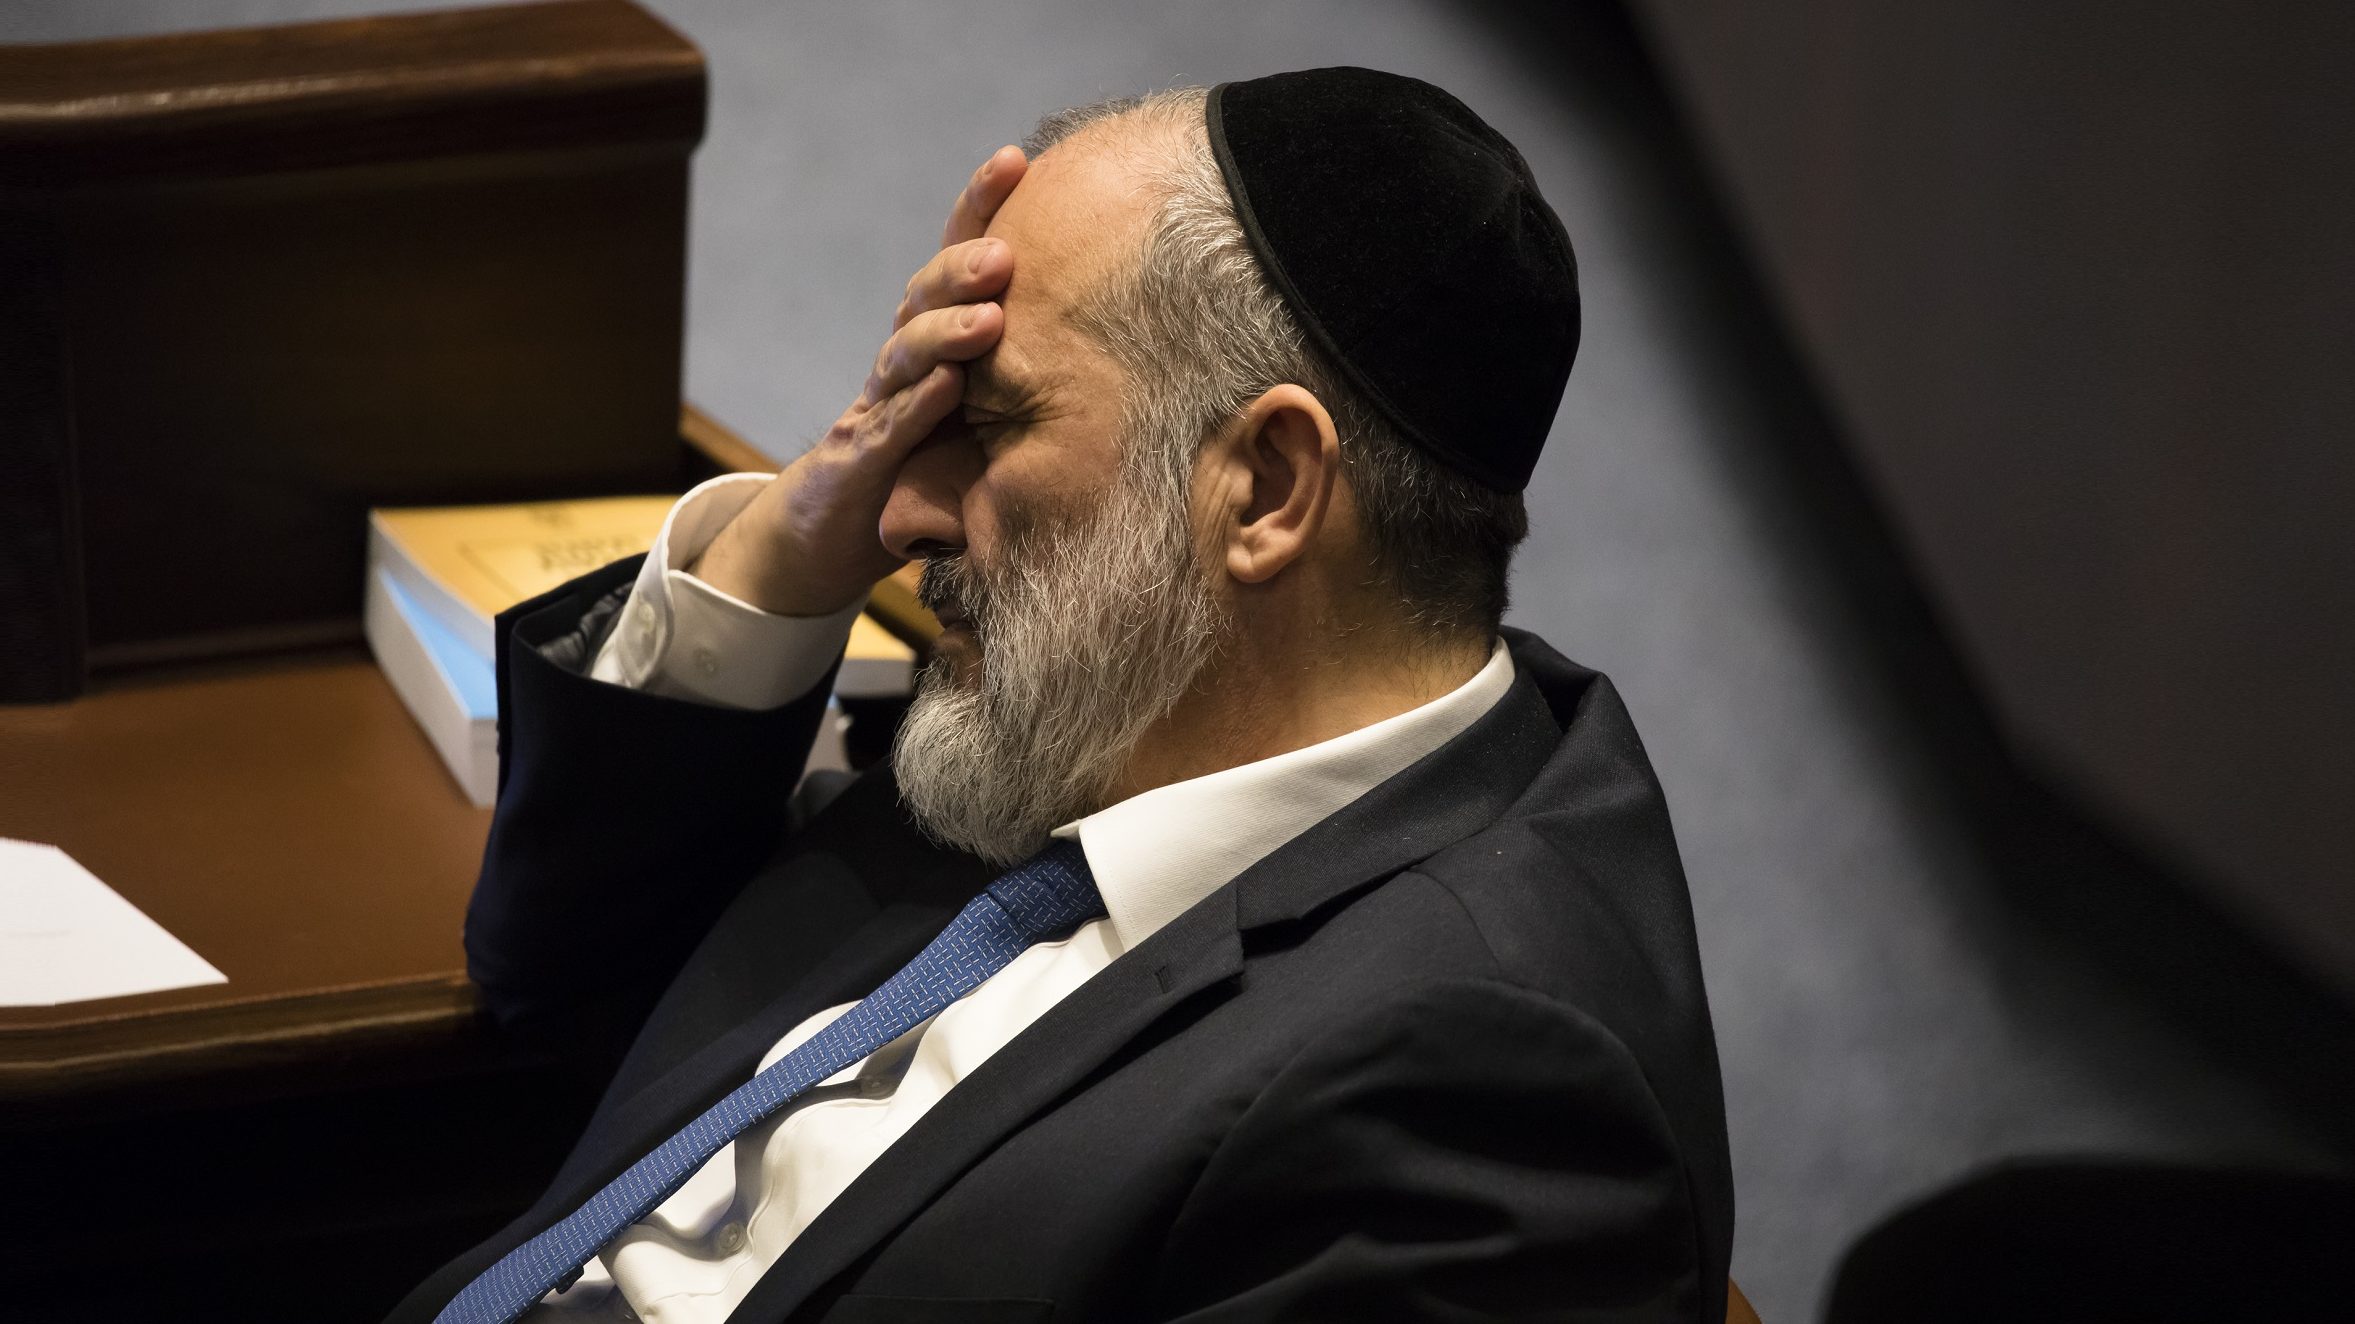 Israel’s High Court Nixes Deri Appointment Over Criminal Convictions